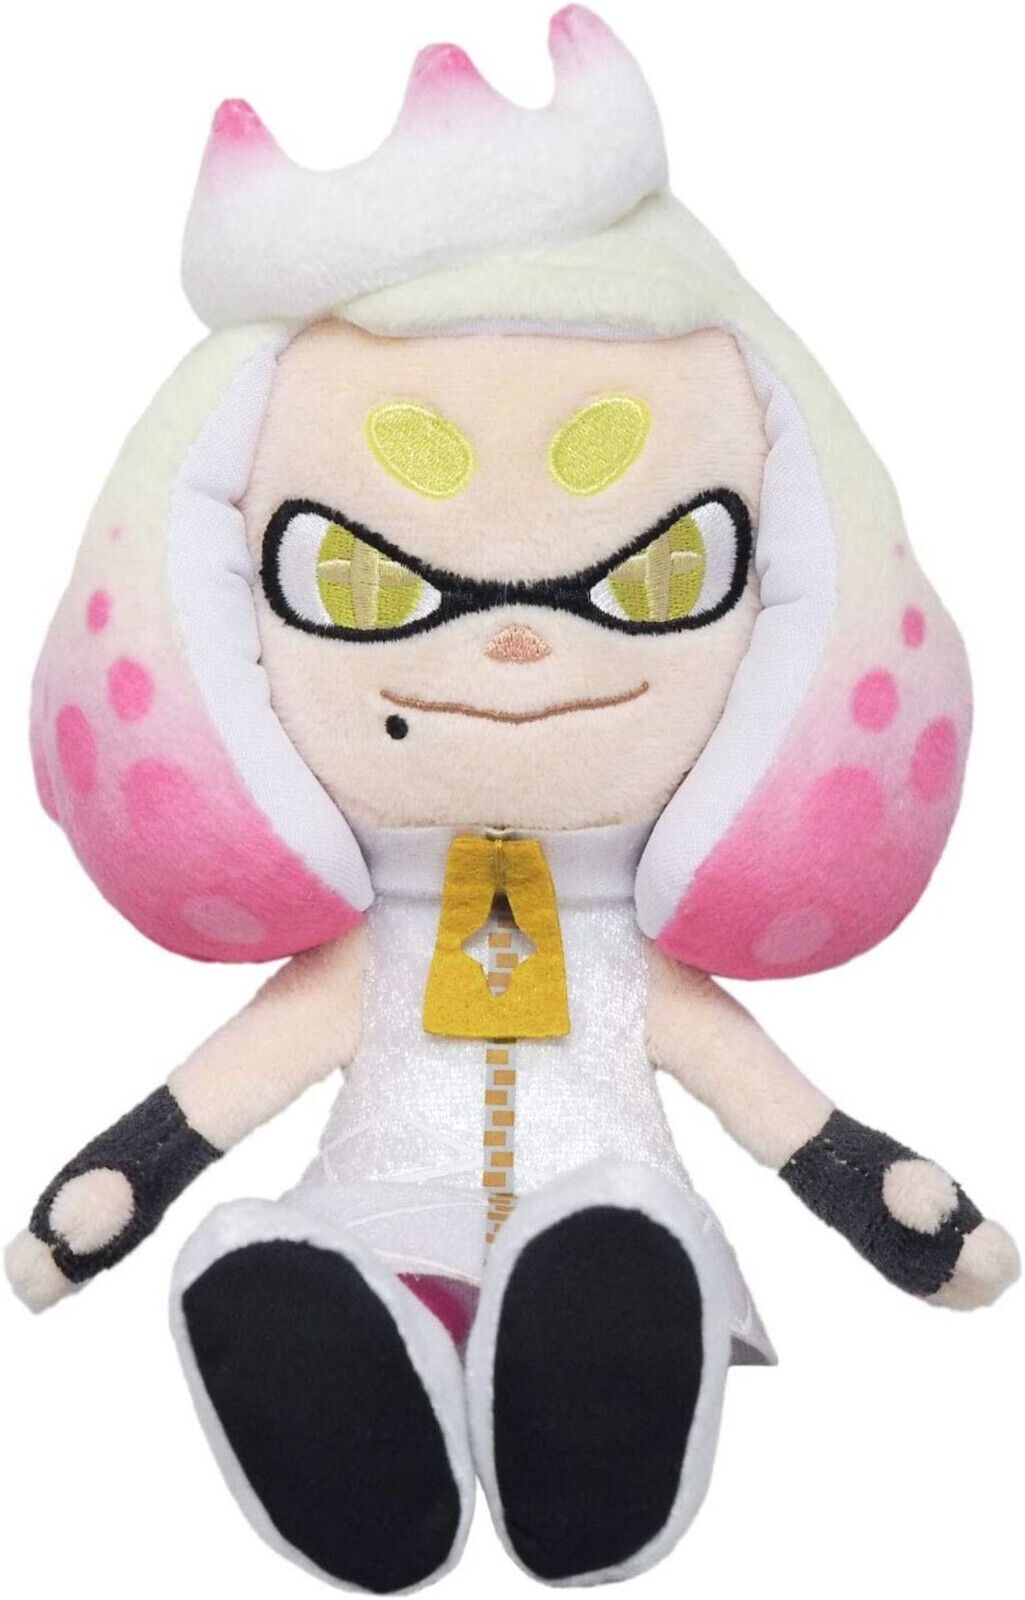 Splatoon 2 ALL STAR COLLECTION Pearl Stuffed toy S Size Plush Doll Game New FS